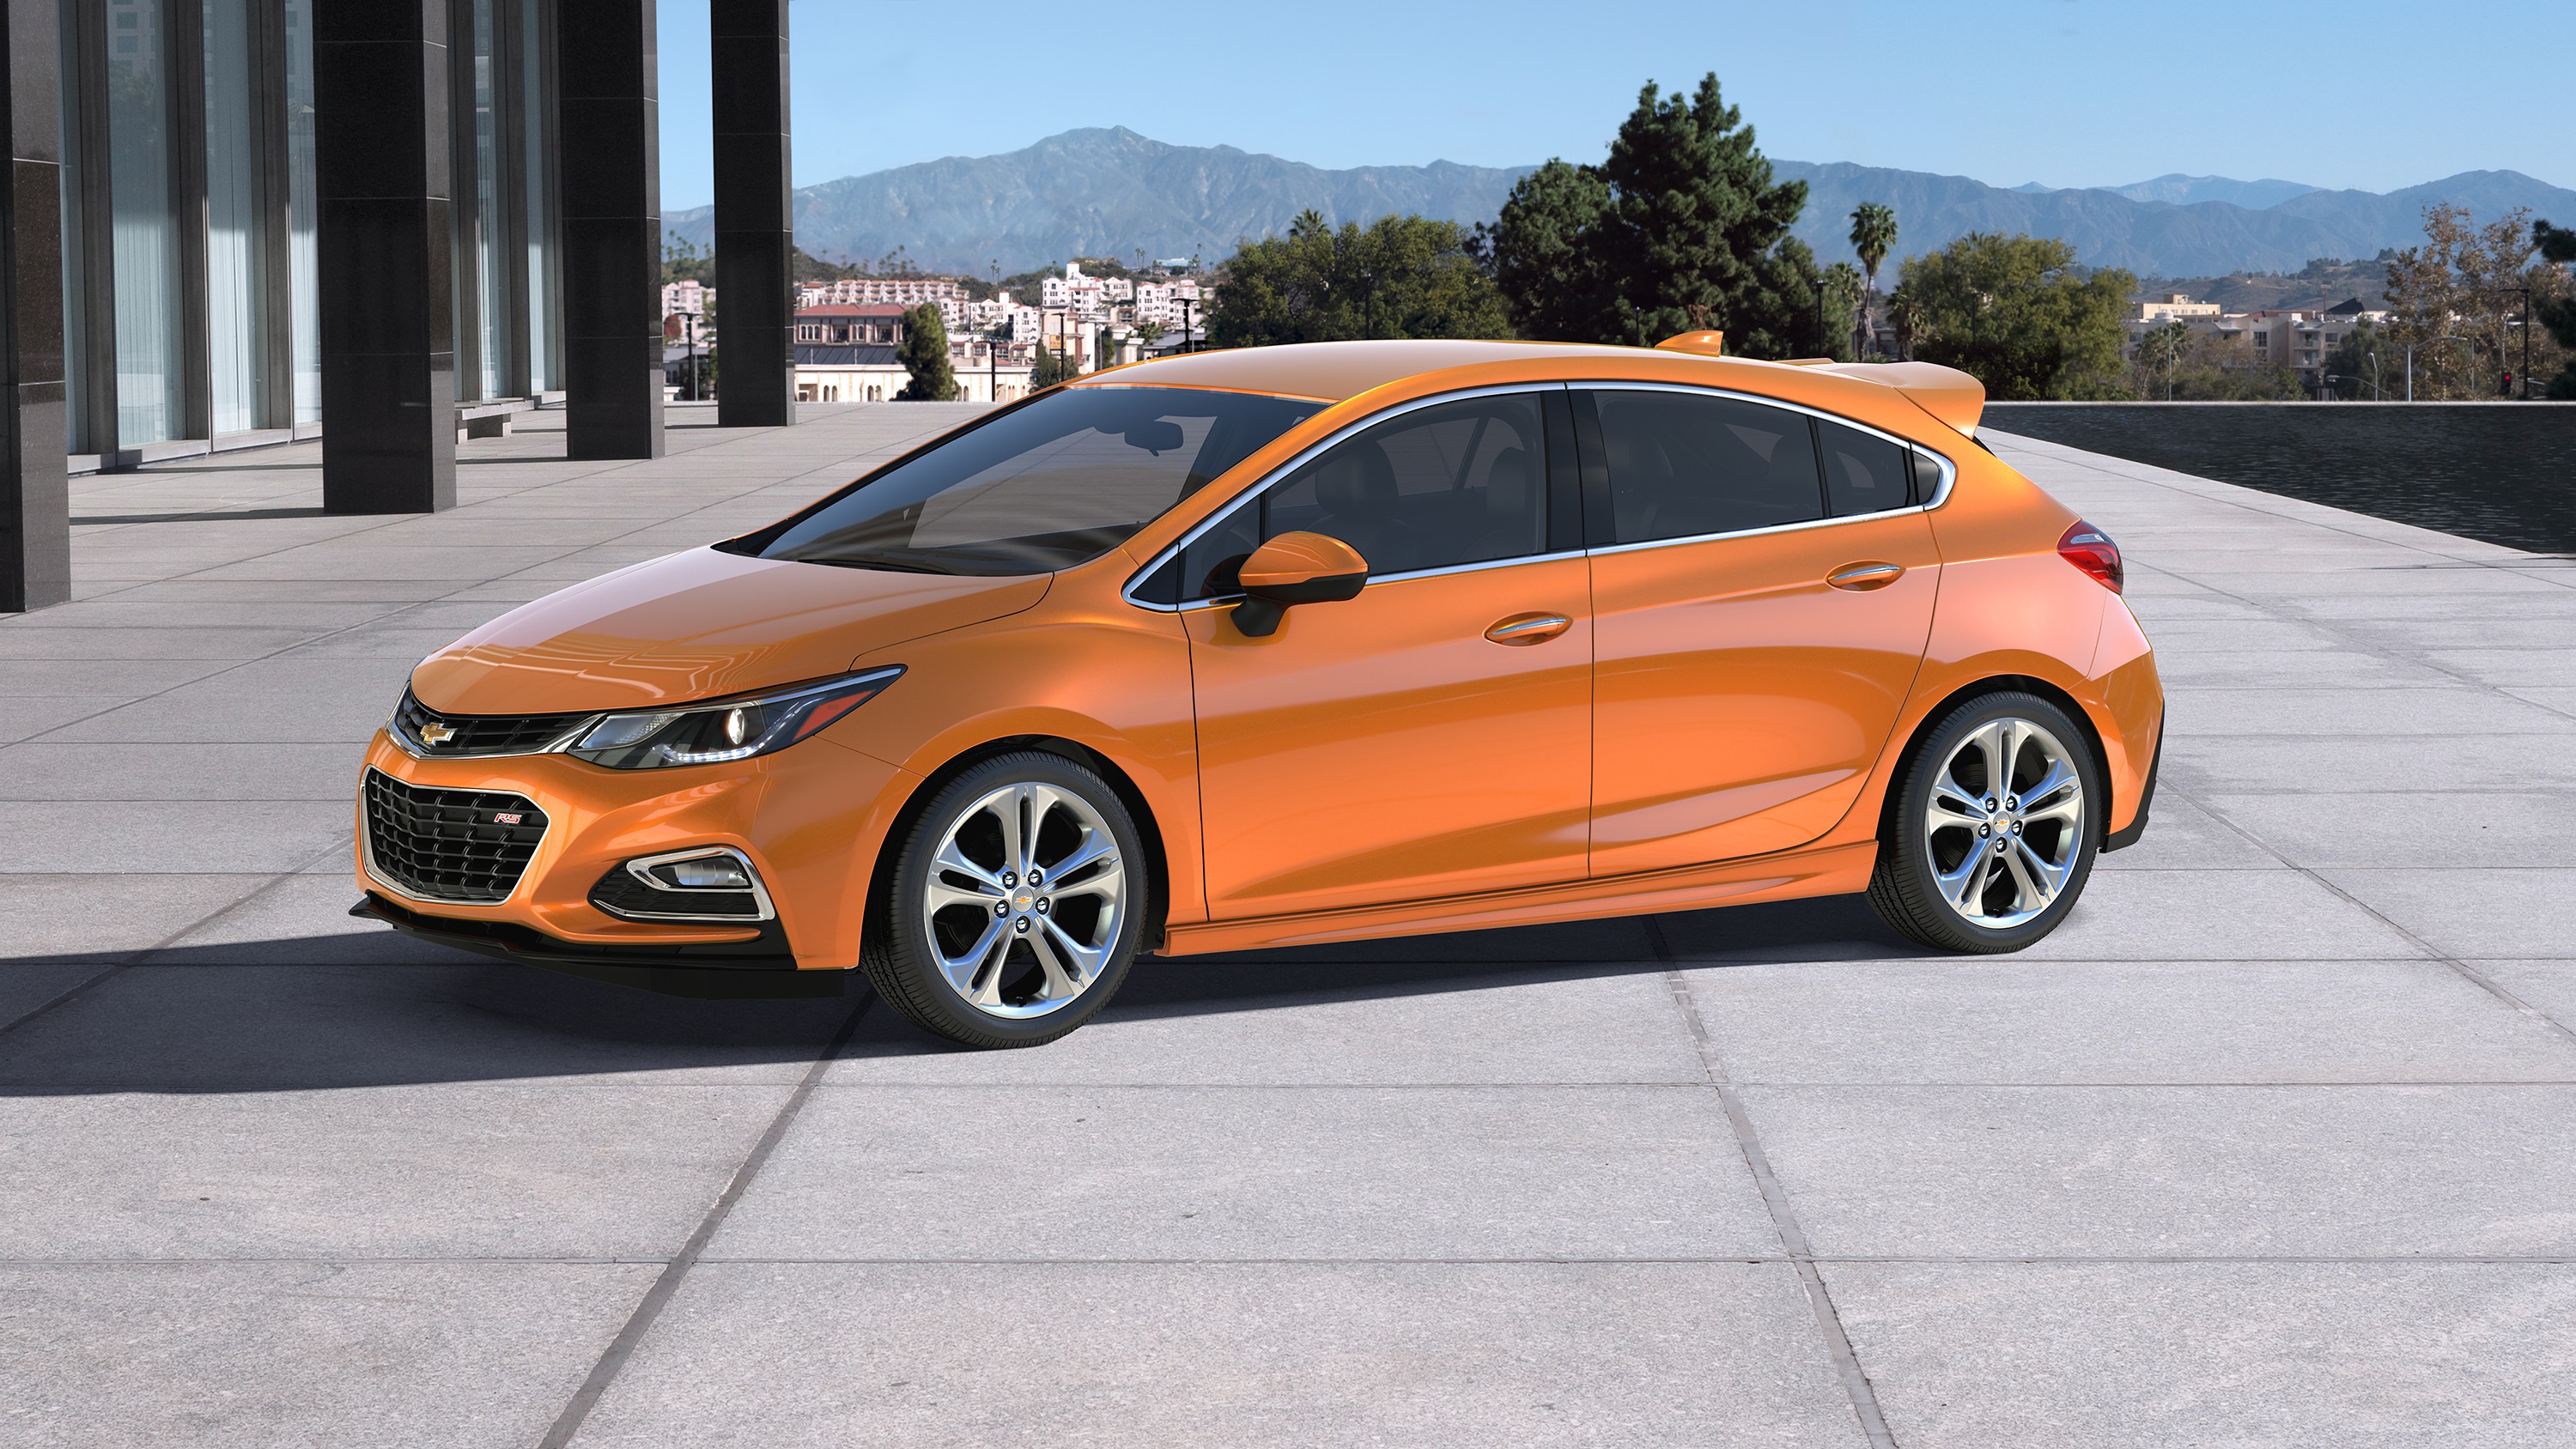 2017 Chevrolet Cruze Hatchback Priced From 22,190